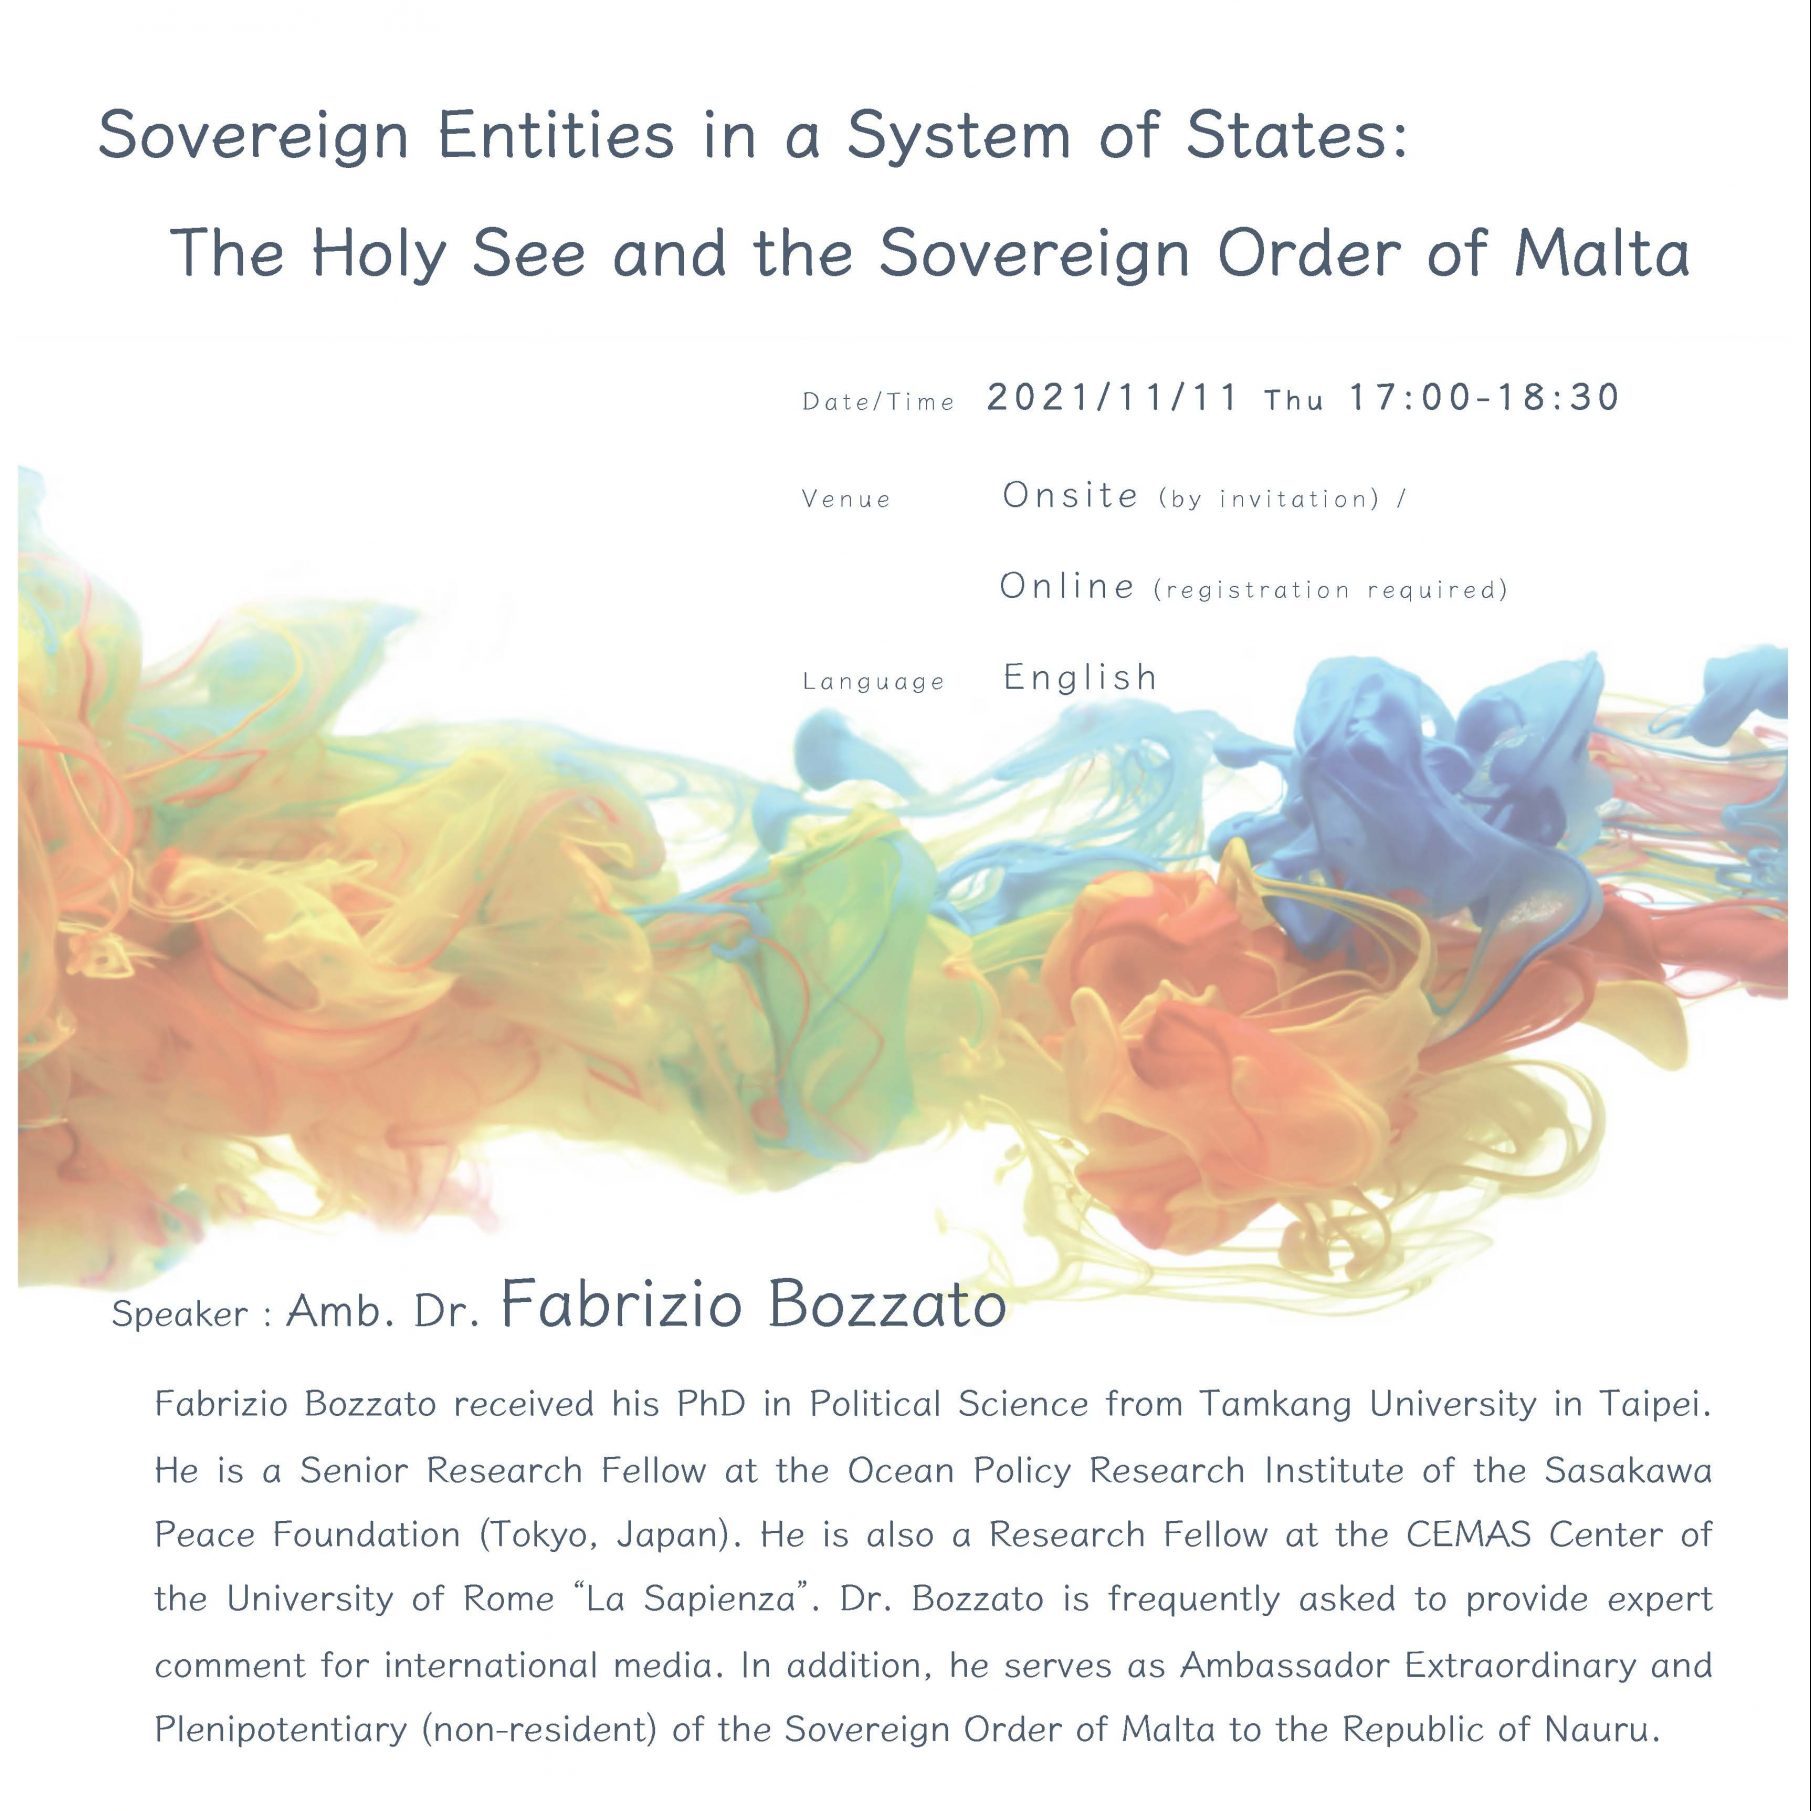 Sovereign Entities in a System of States: The Holy See and the Sovereign Order of Malta